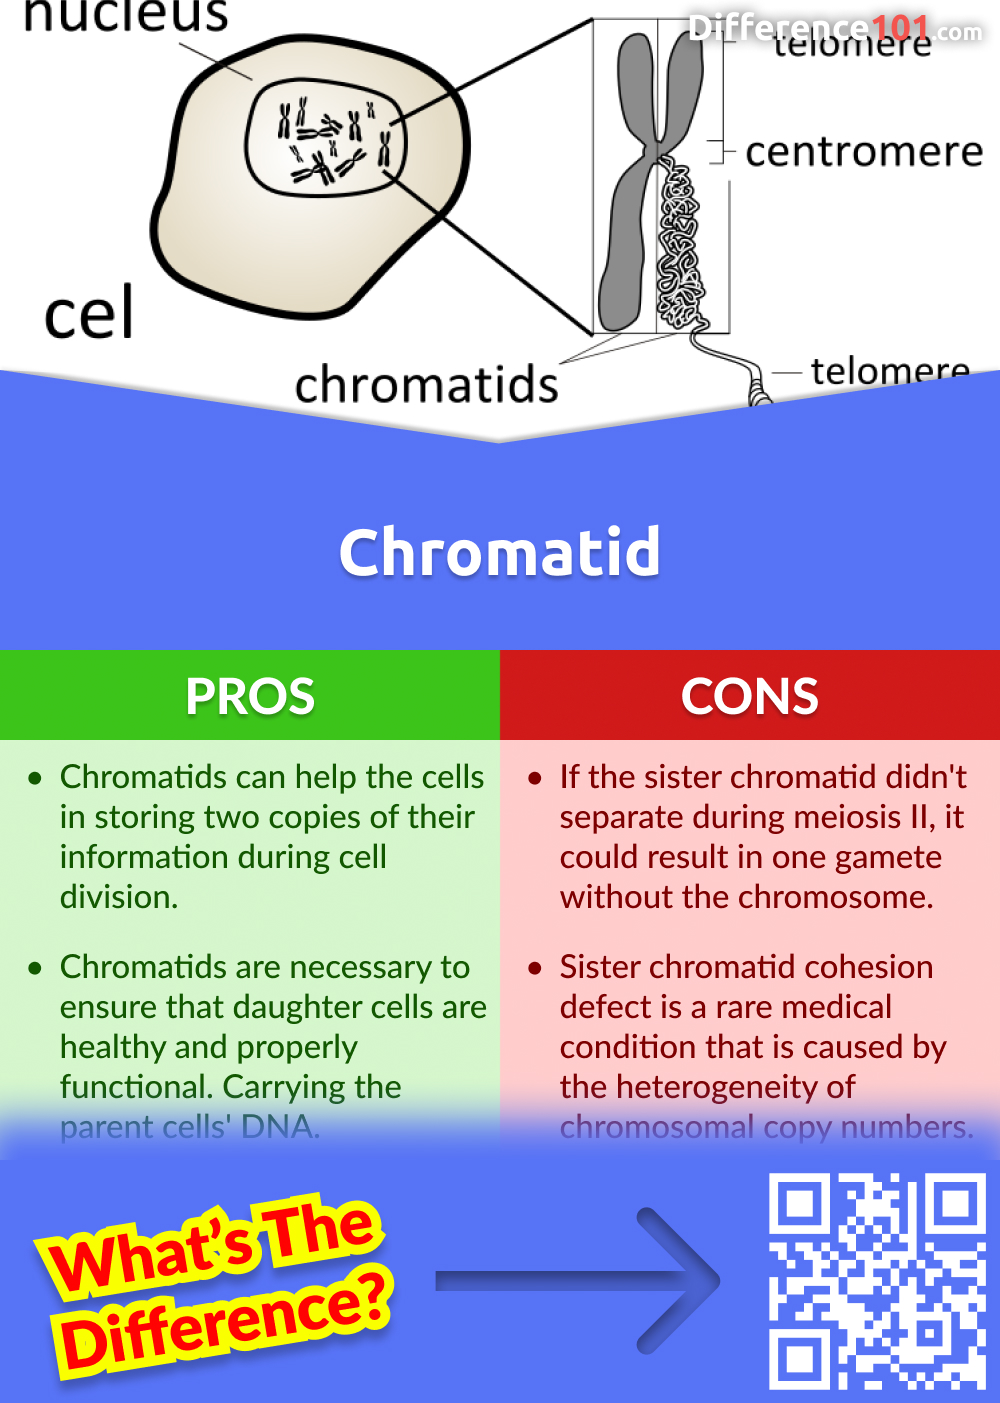 Pros and Cons of Chromatid